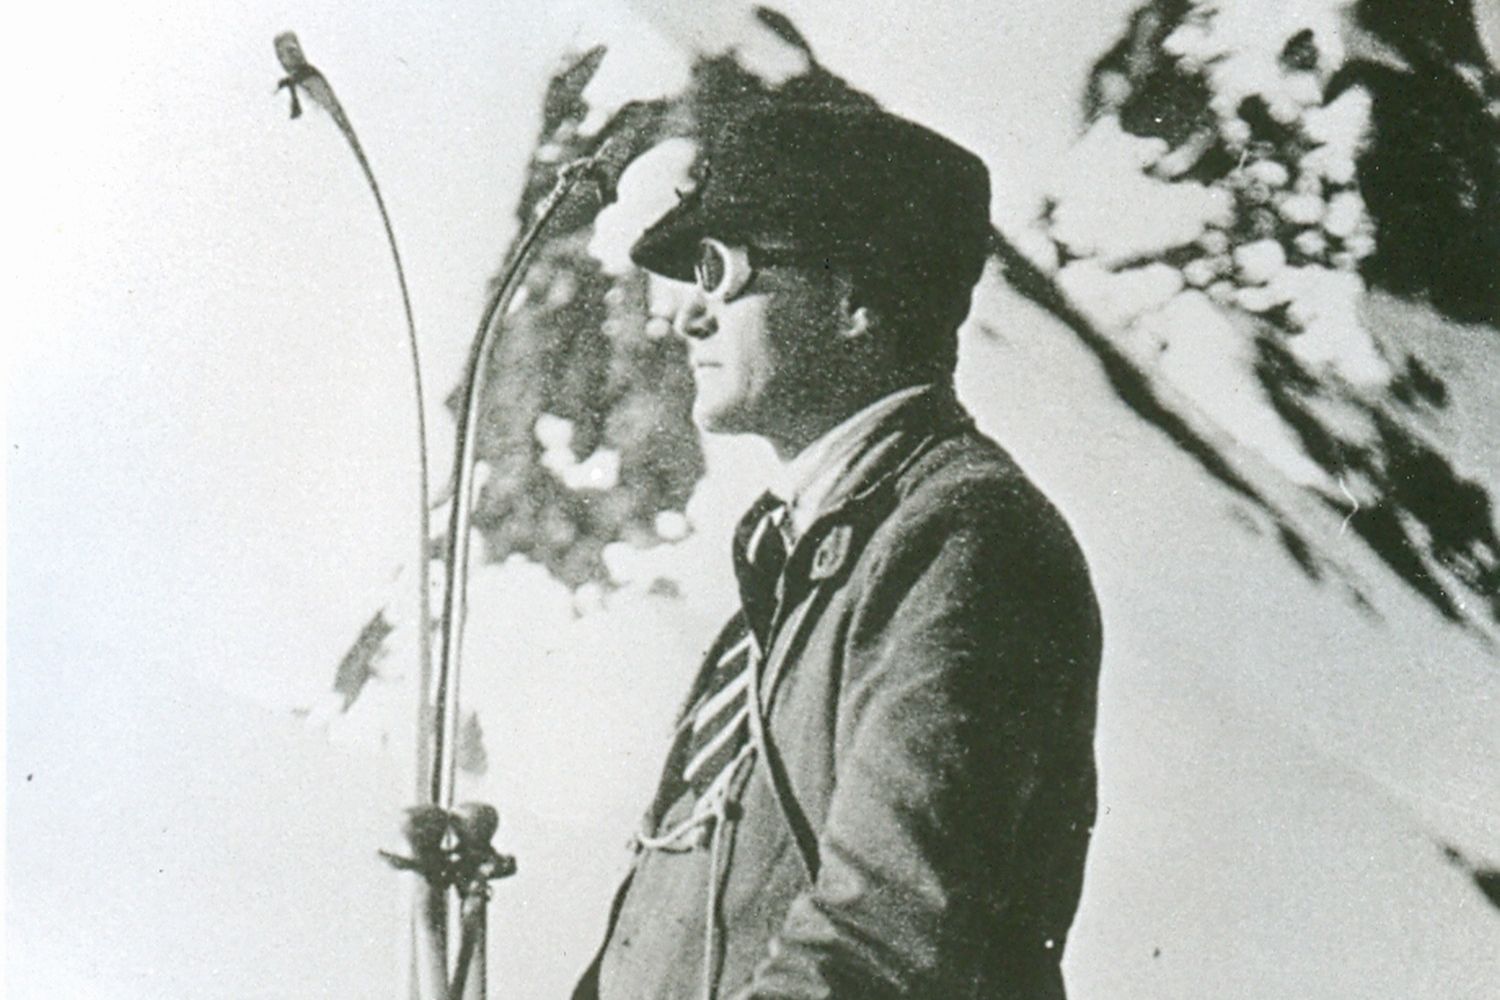 Arnold Lunn on the Eigerjoch in 1924 during the first ski ascent of Eiger with Walter Amstutz (photo taken by Walter)